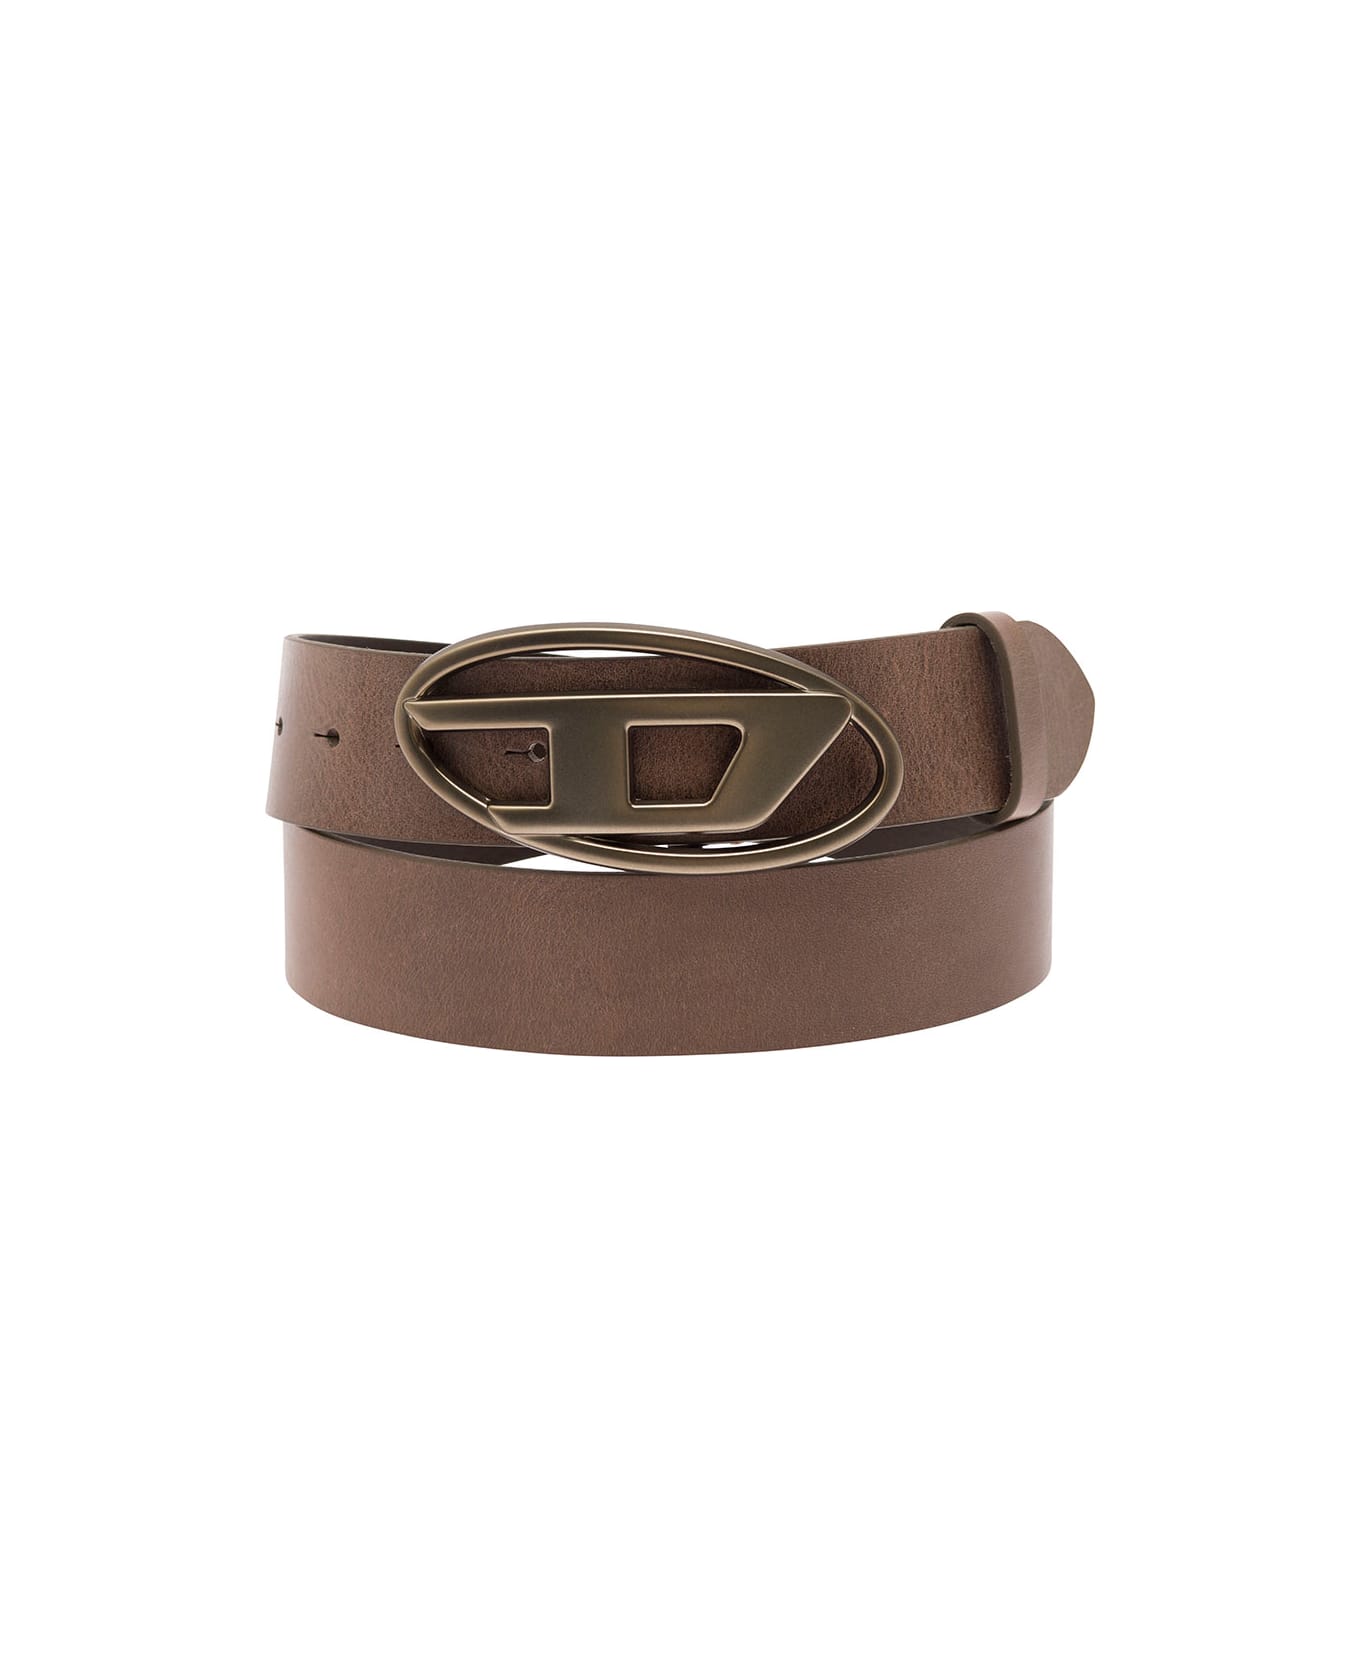 Diesel 'b-1dr' Brown Belt With Oval D Buckle In Leather Man - Brown